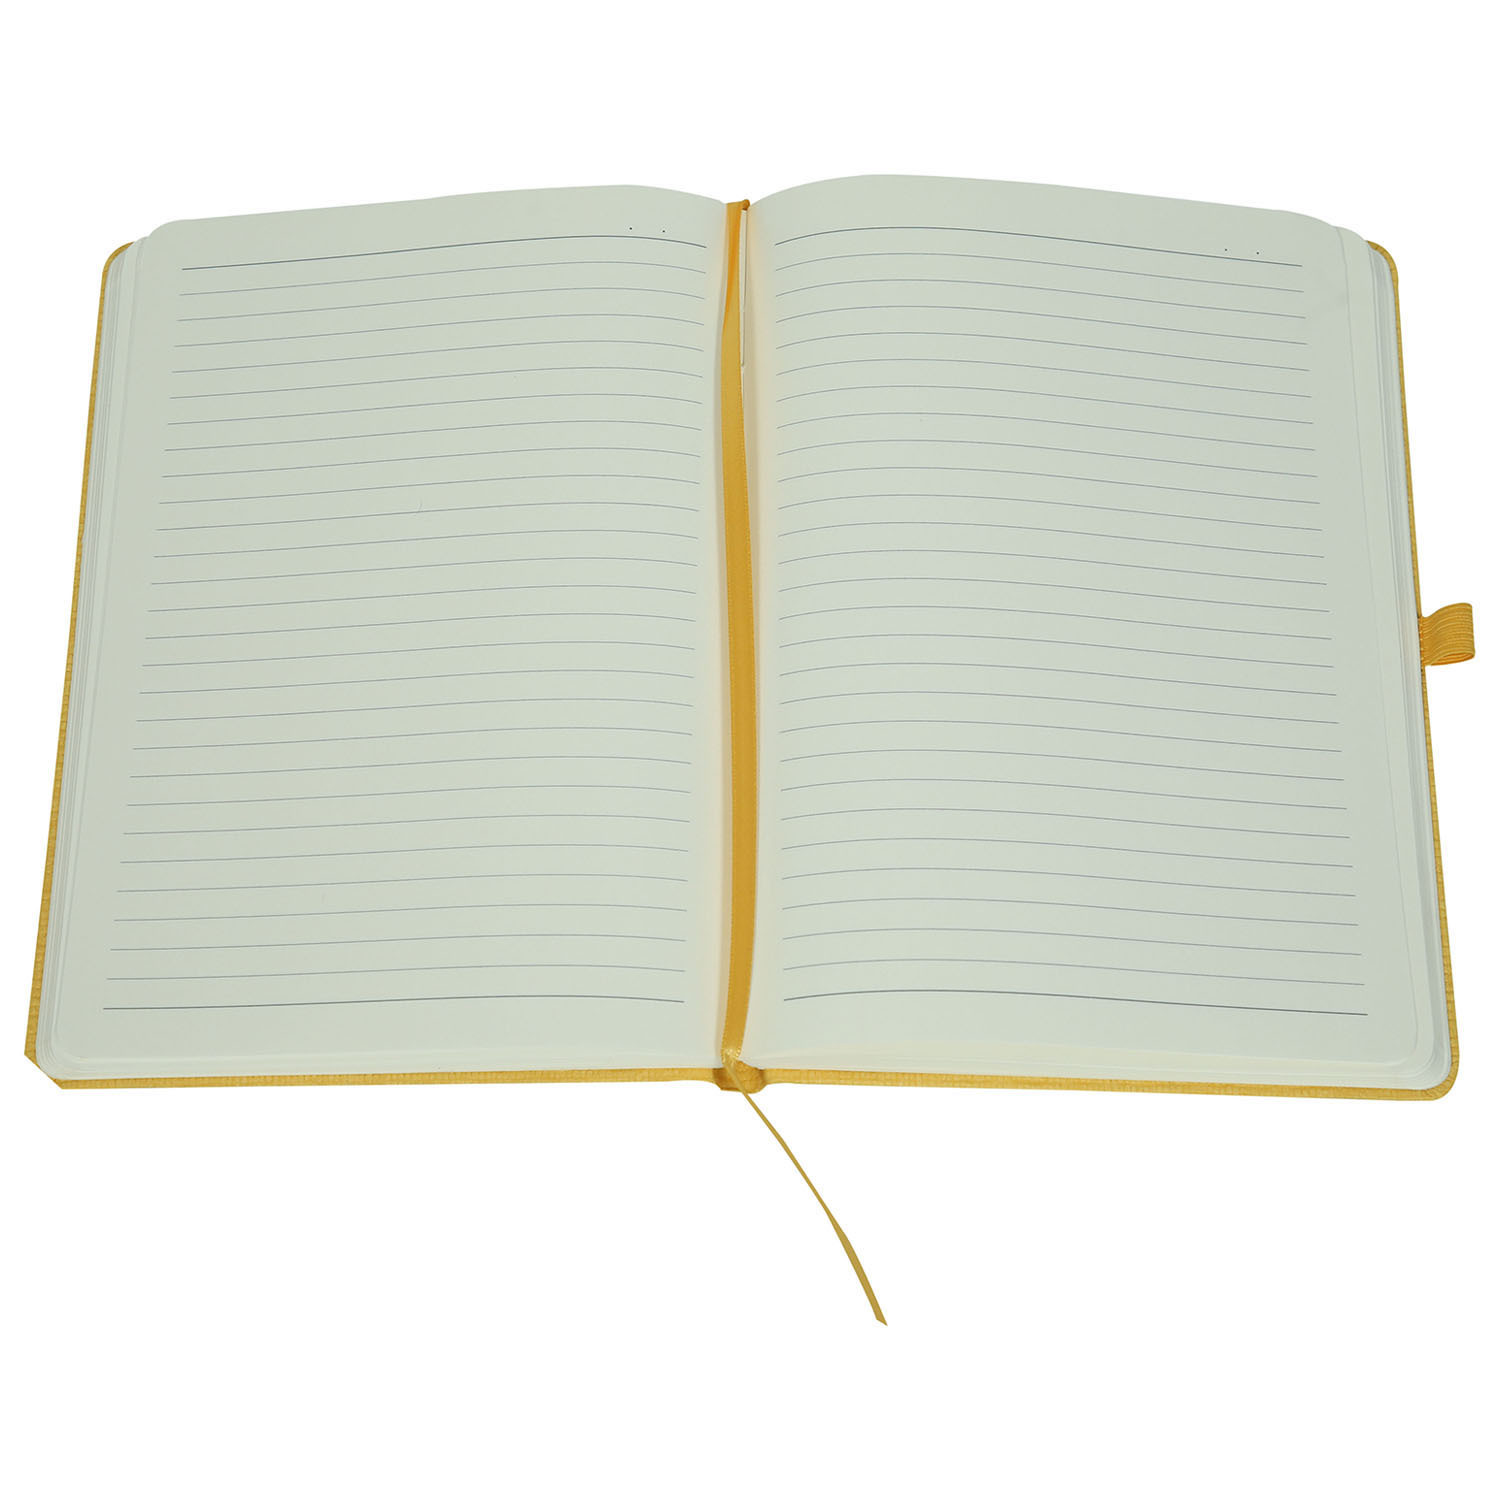 Comma Abaca - A5 Size - Hard Bound Notebook (Yellow)